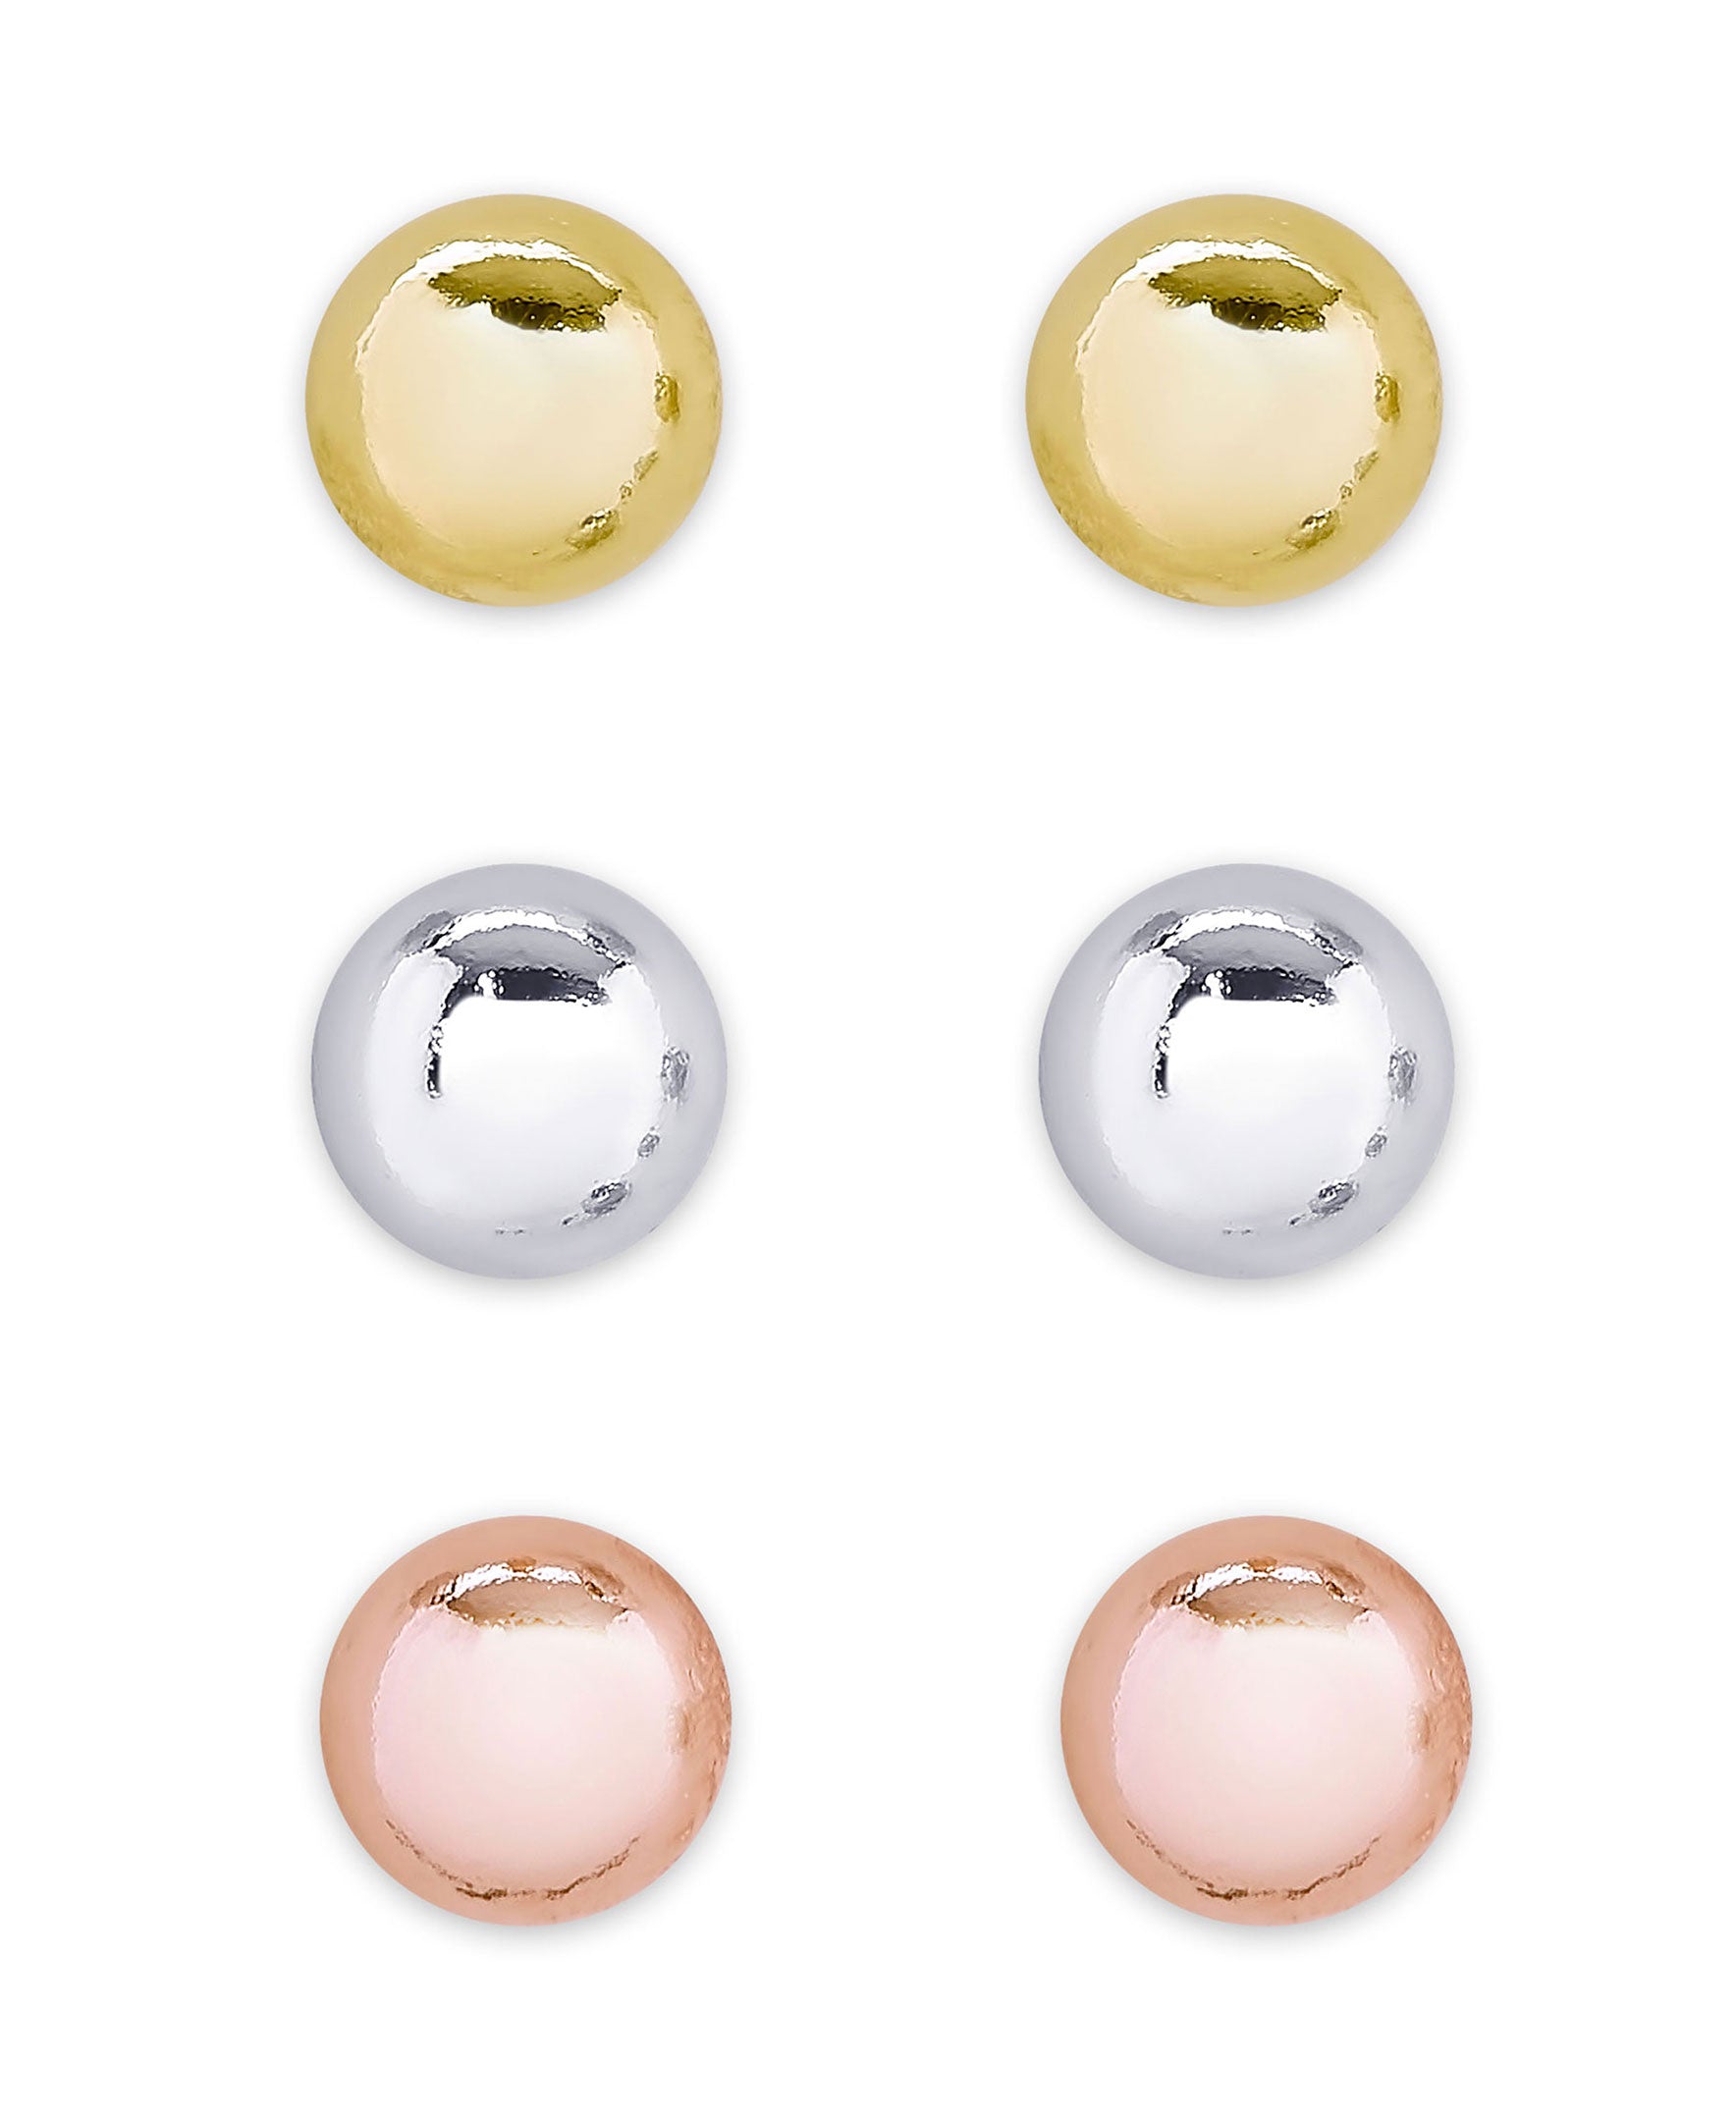 Luminous yellow stone studded big round stud earrings copper gold plated  for women & girls - AQUASTREET - 4172852